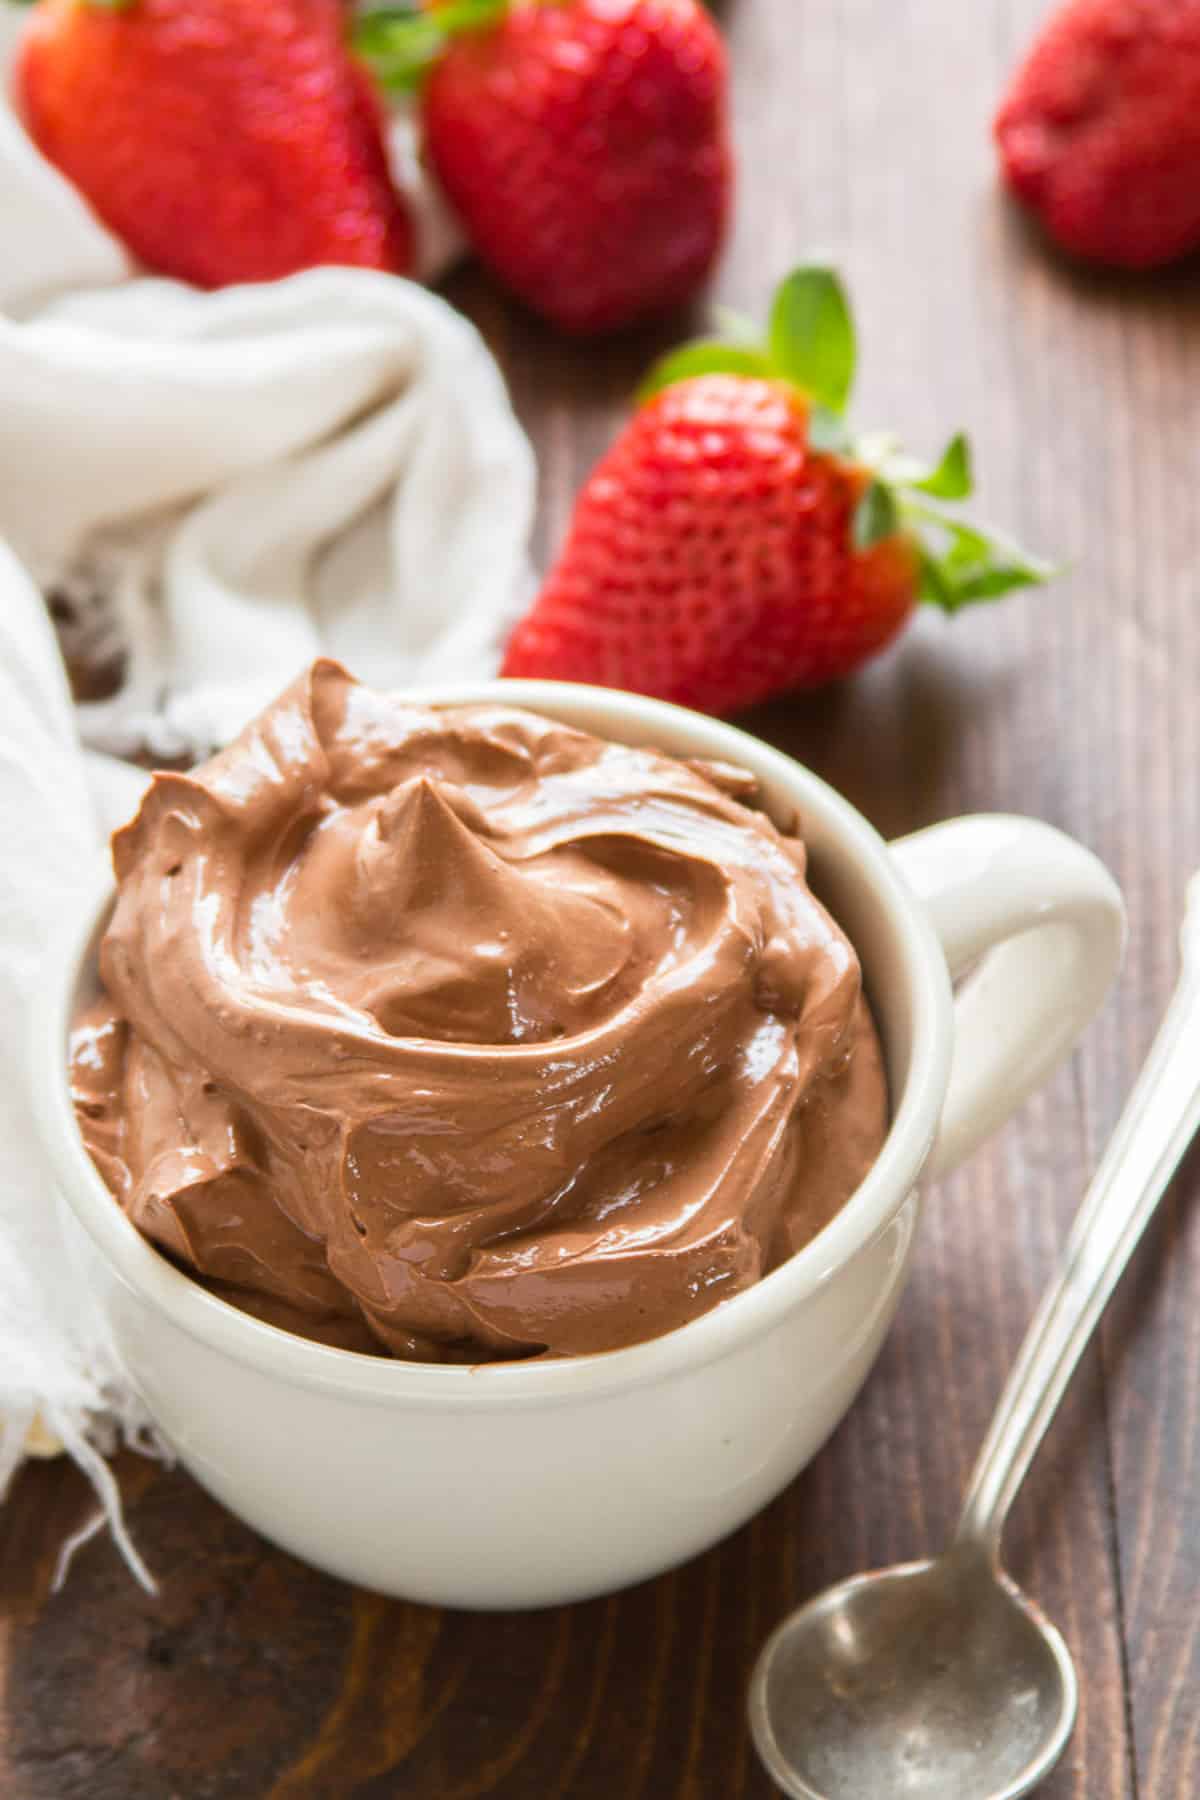 Cup of Vegan Chocolate Pudding with strawberries in the background.